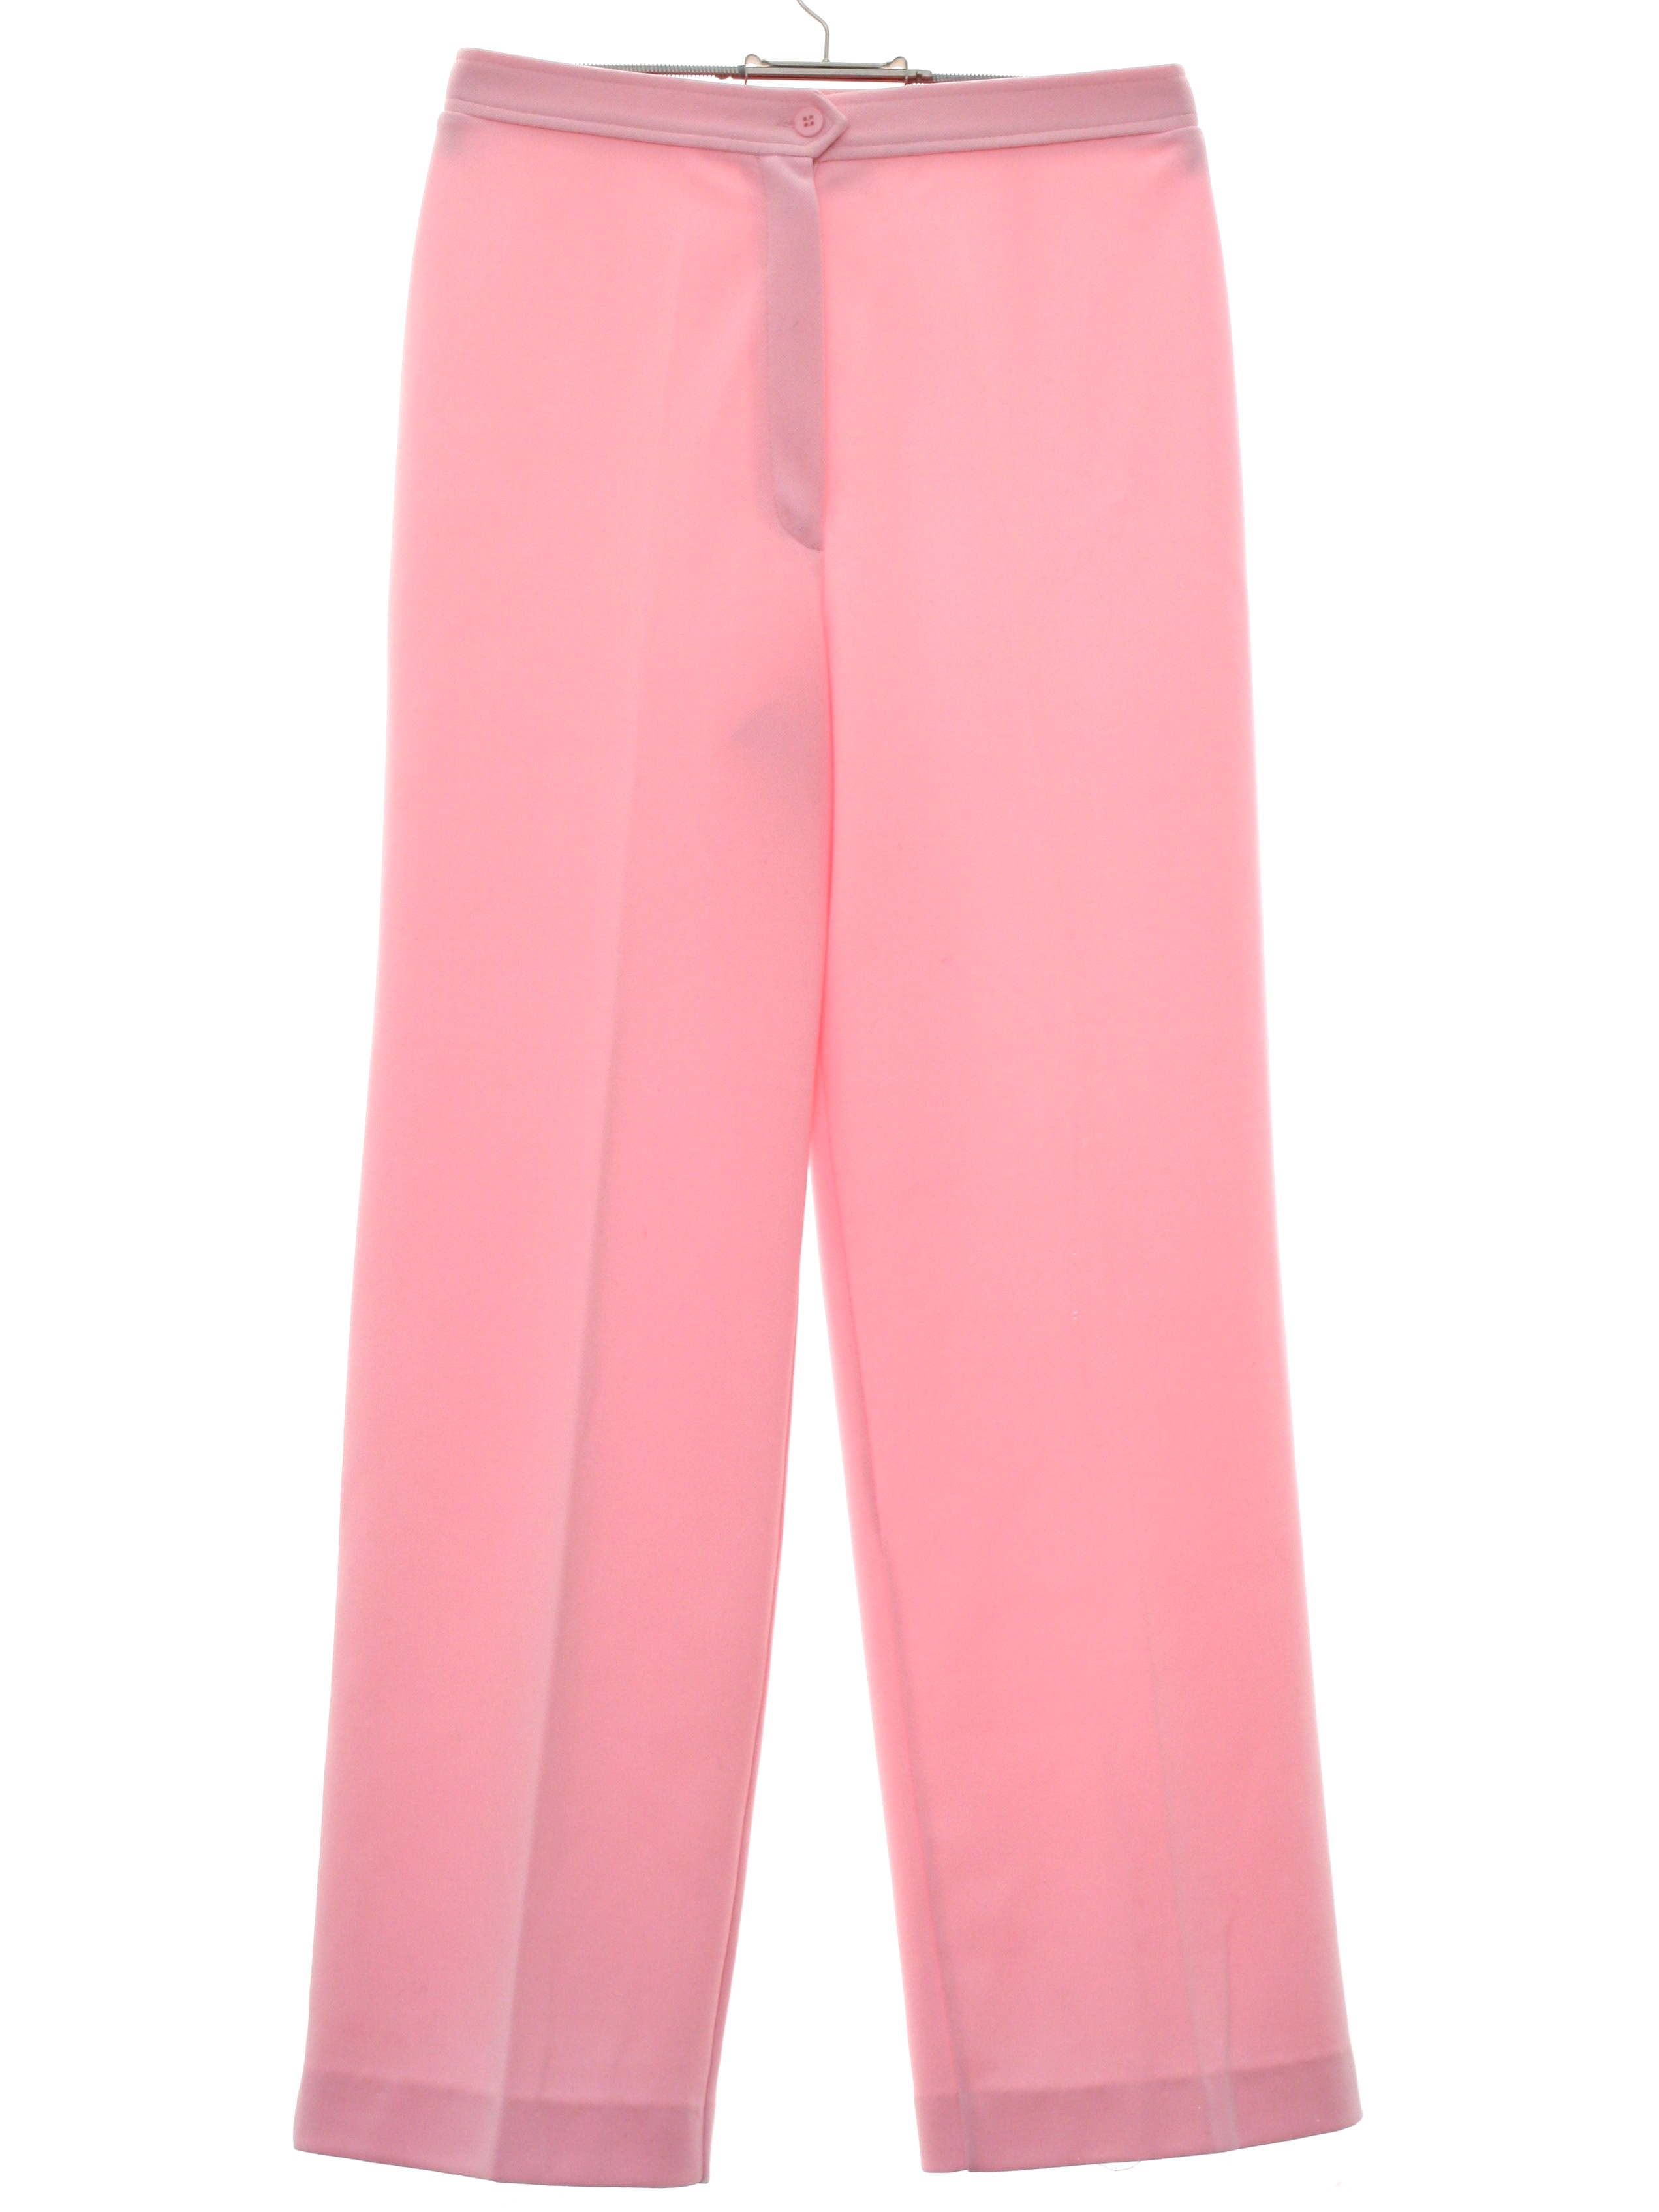 Vintage 1970's Pants: Late 70s or early 80s -Devon- Womens light pink ...